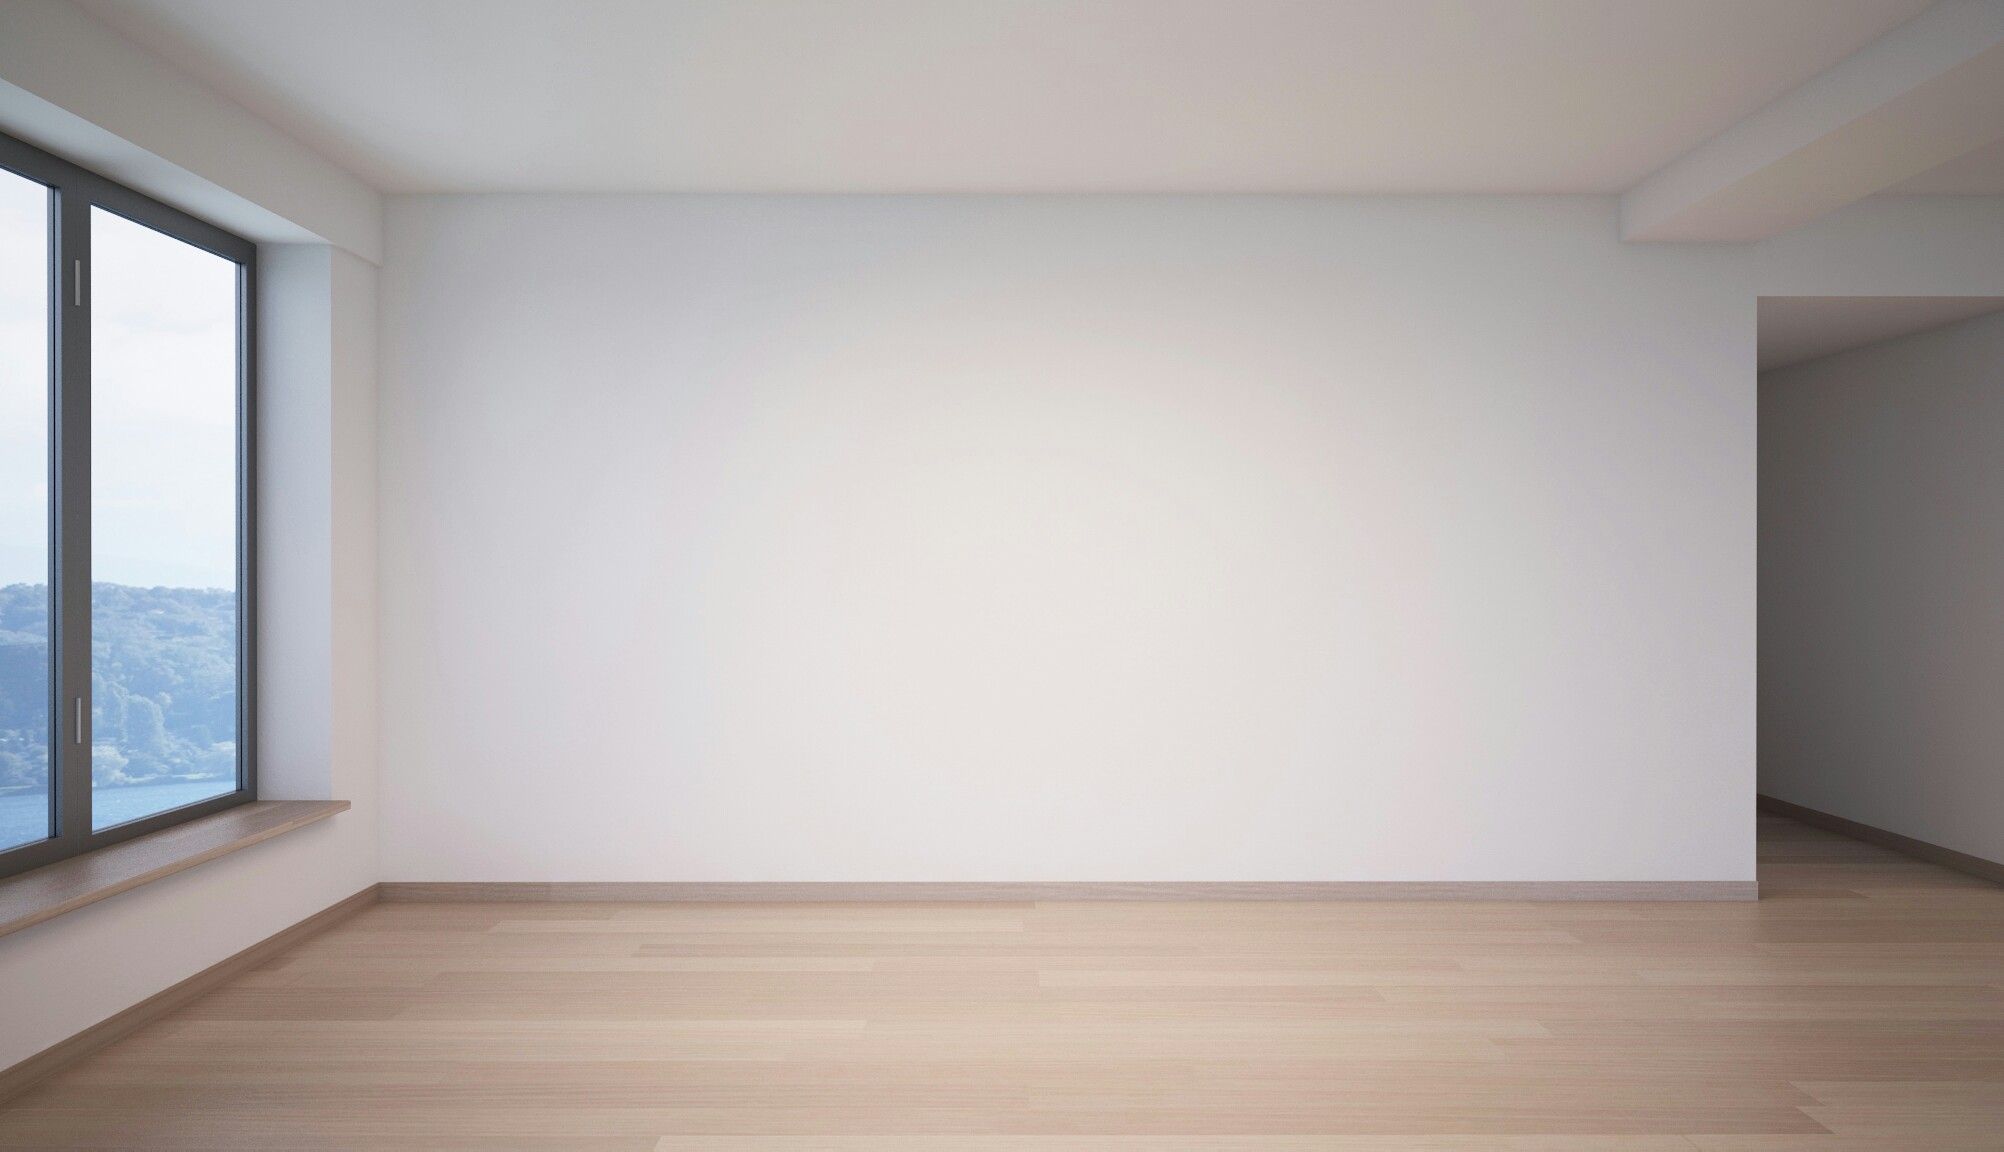 Free photo: Empty room - Architecture, Ceiling, Frames - Free Download